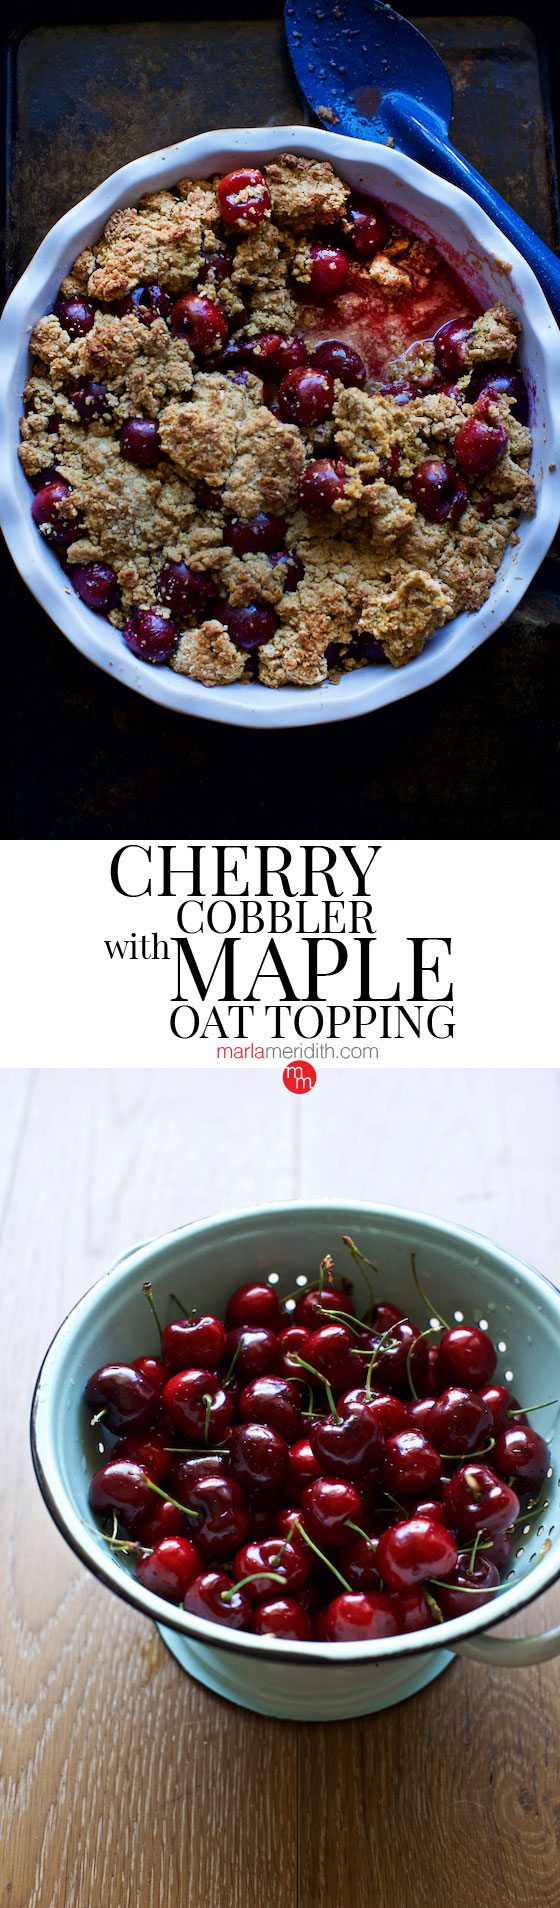 Cherry Cobbler with Maple Oat Topping. This #recipe is the ultimate summer time #dessert MarlaMeridith.com ( @marlameridith )